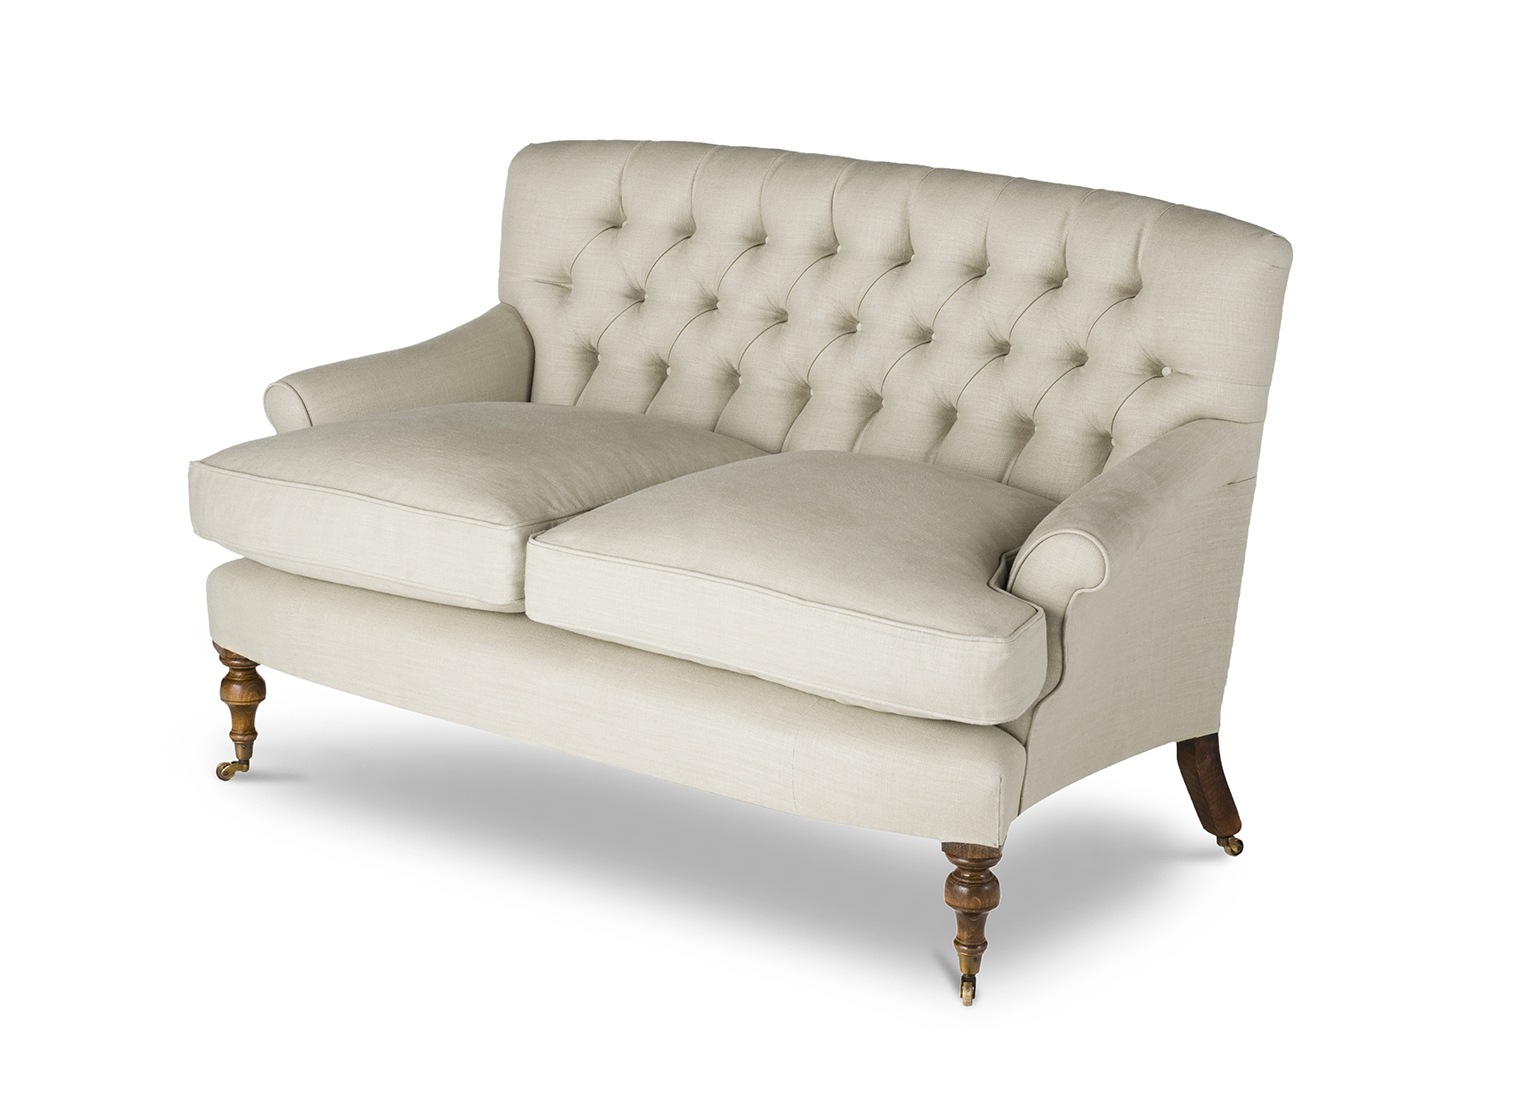 Emily 2 seater sofa in Donegal linen - Oatmeal - Beaumont & Fletcher